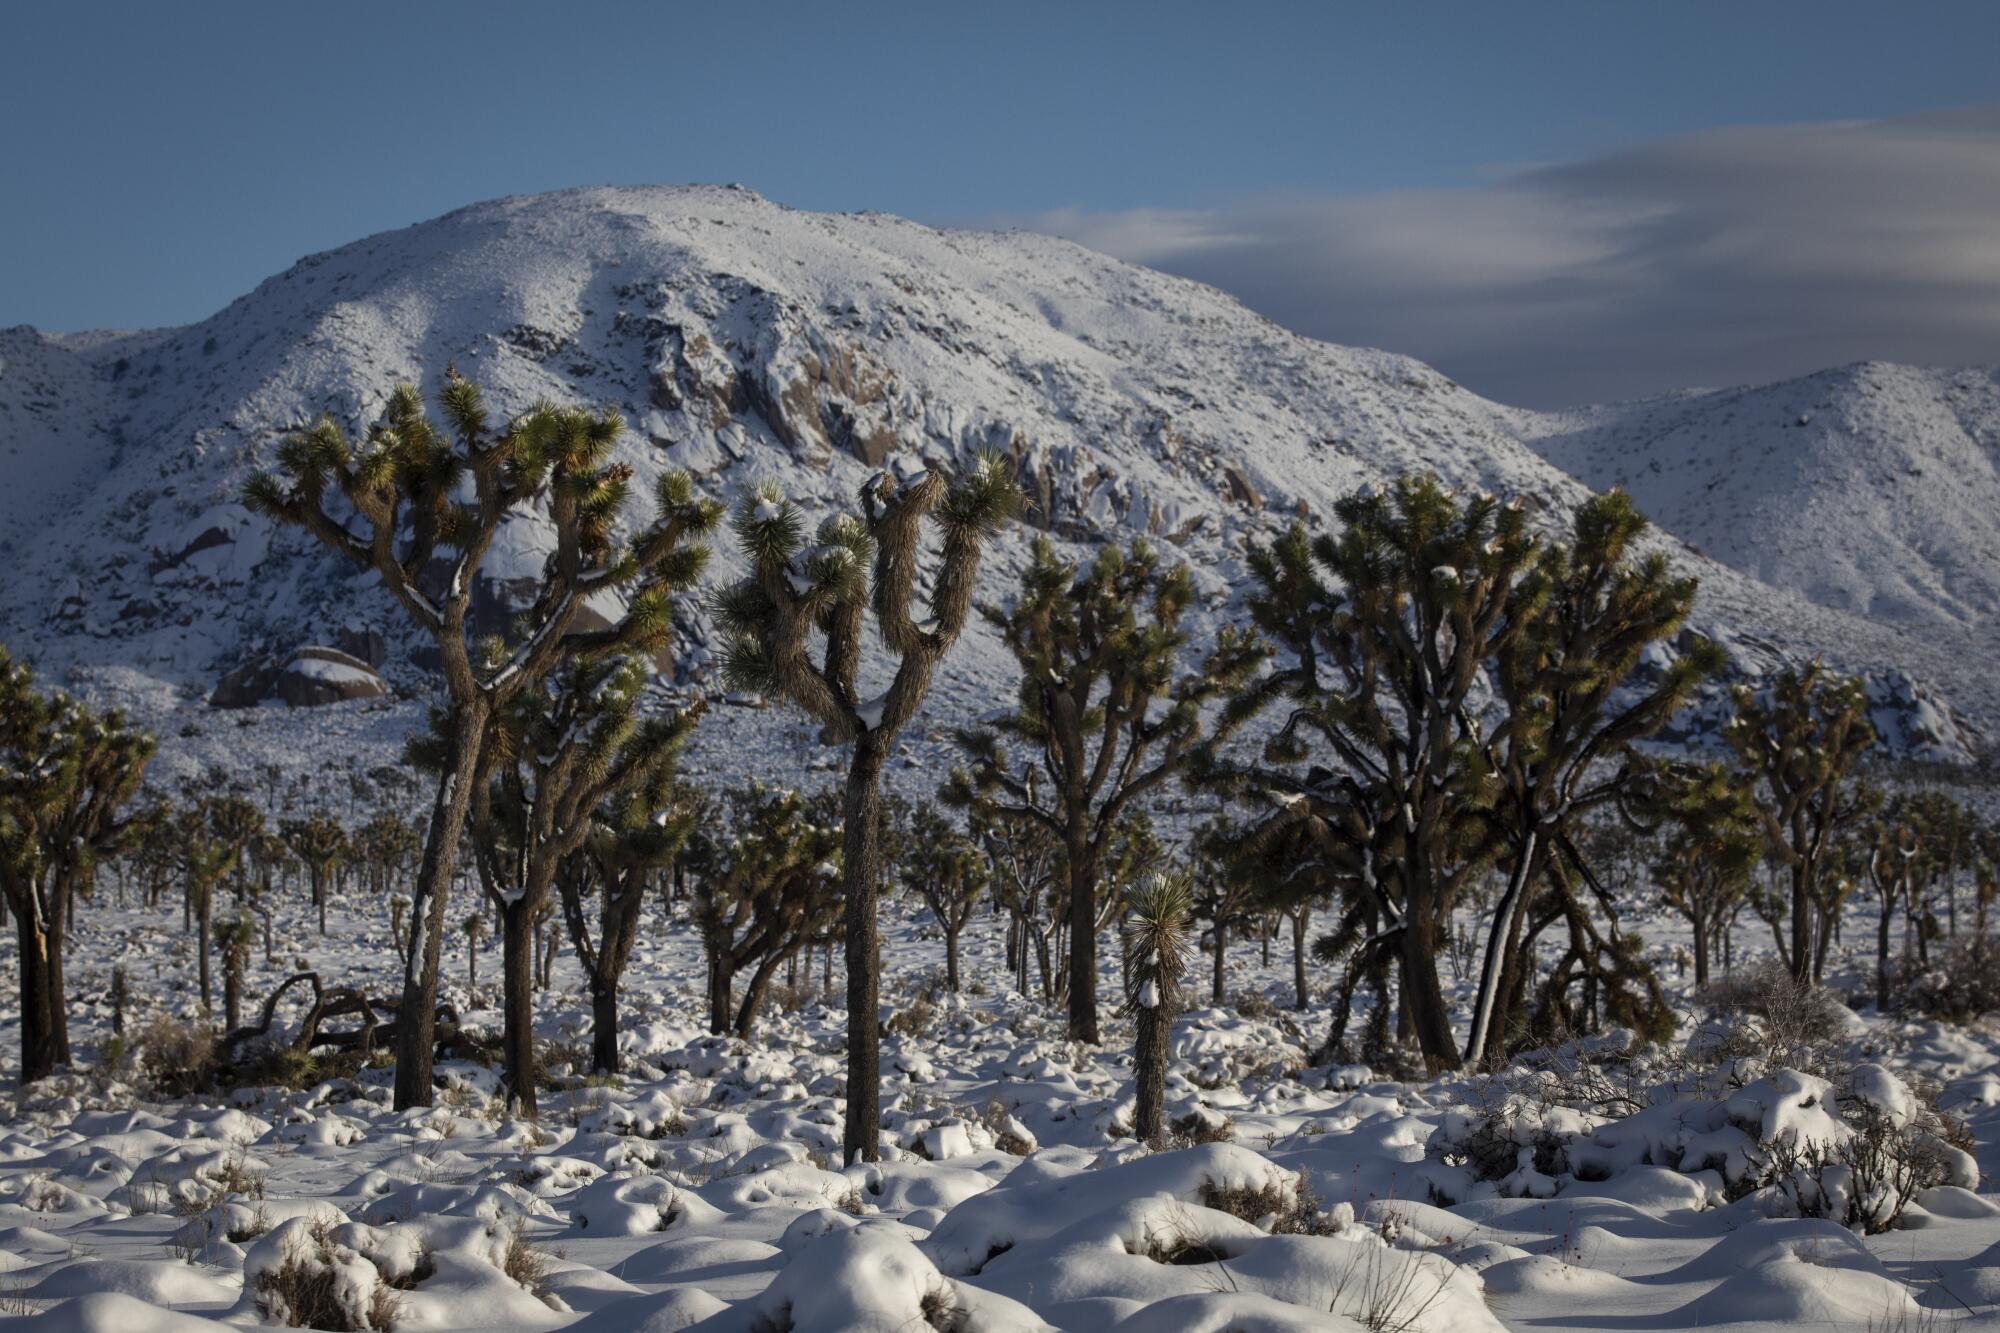 Joshua trees rise from a snow-covered desert.